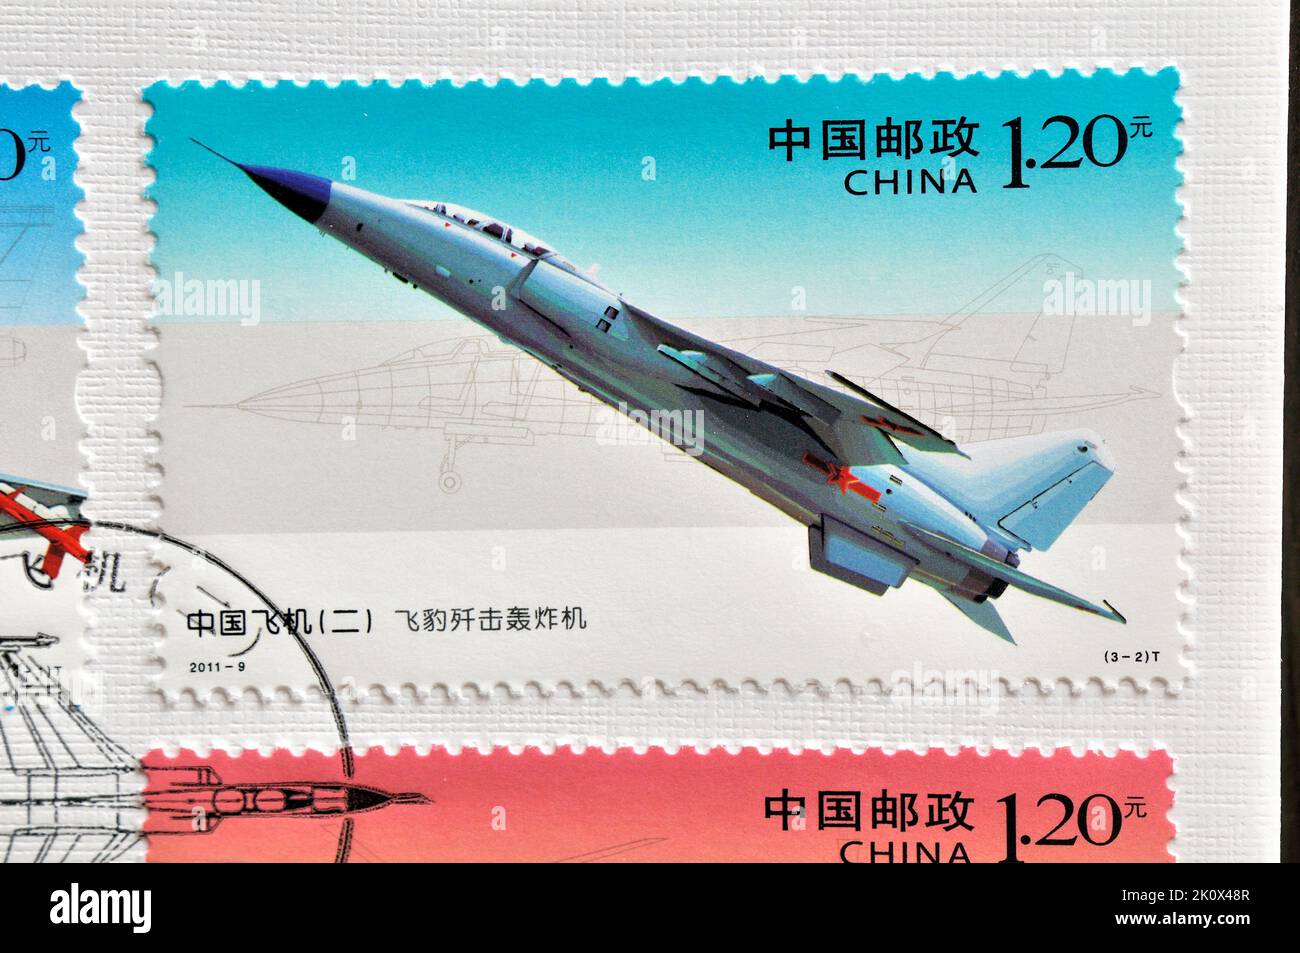 CHINA - CIRCA 2011: A stamps printed in China shows 2011-9 Chinese Aircraft (2)   JH-7 fighter-bomber, circa 2011. Stock Photo